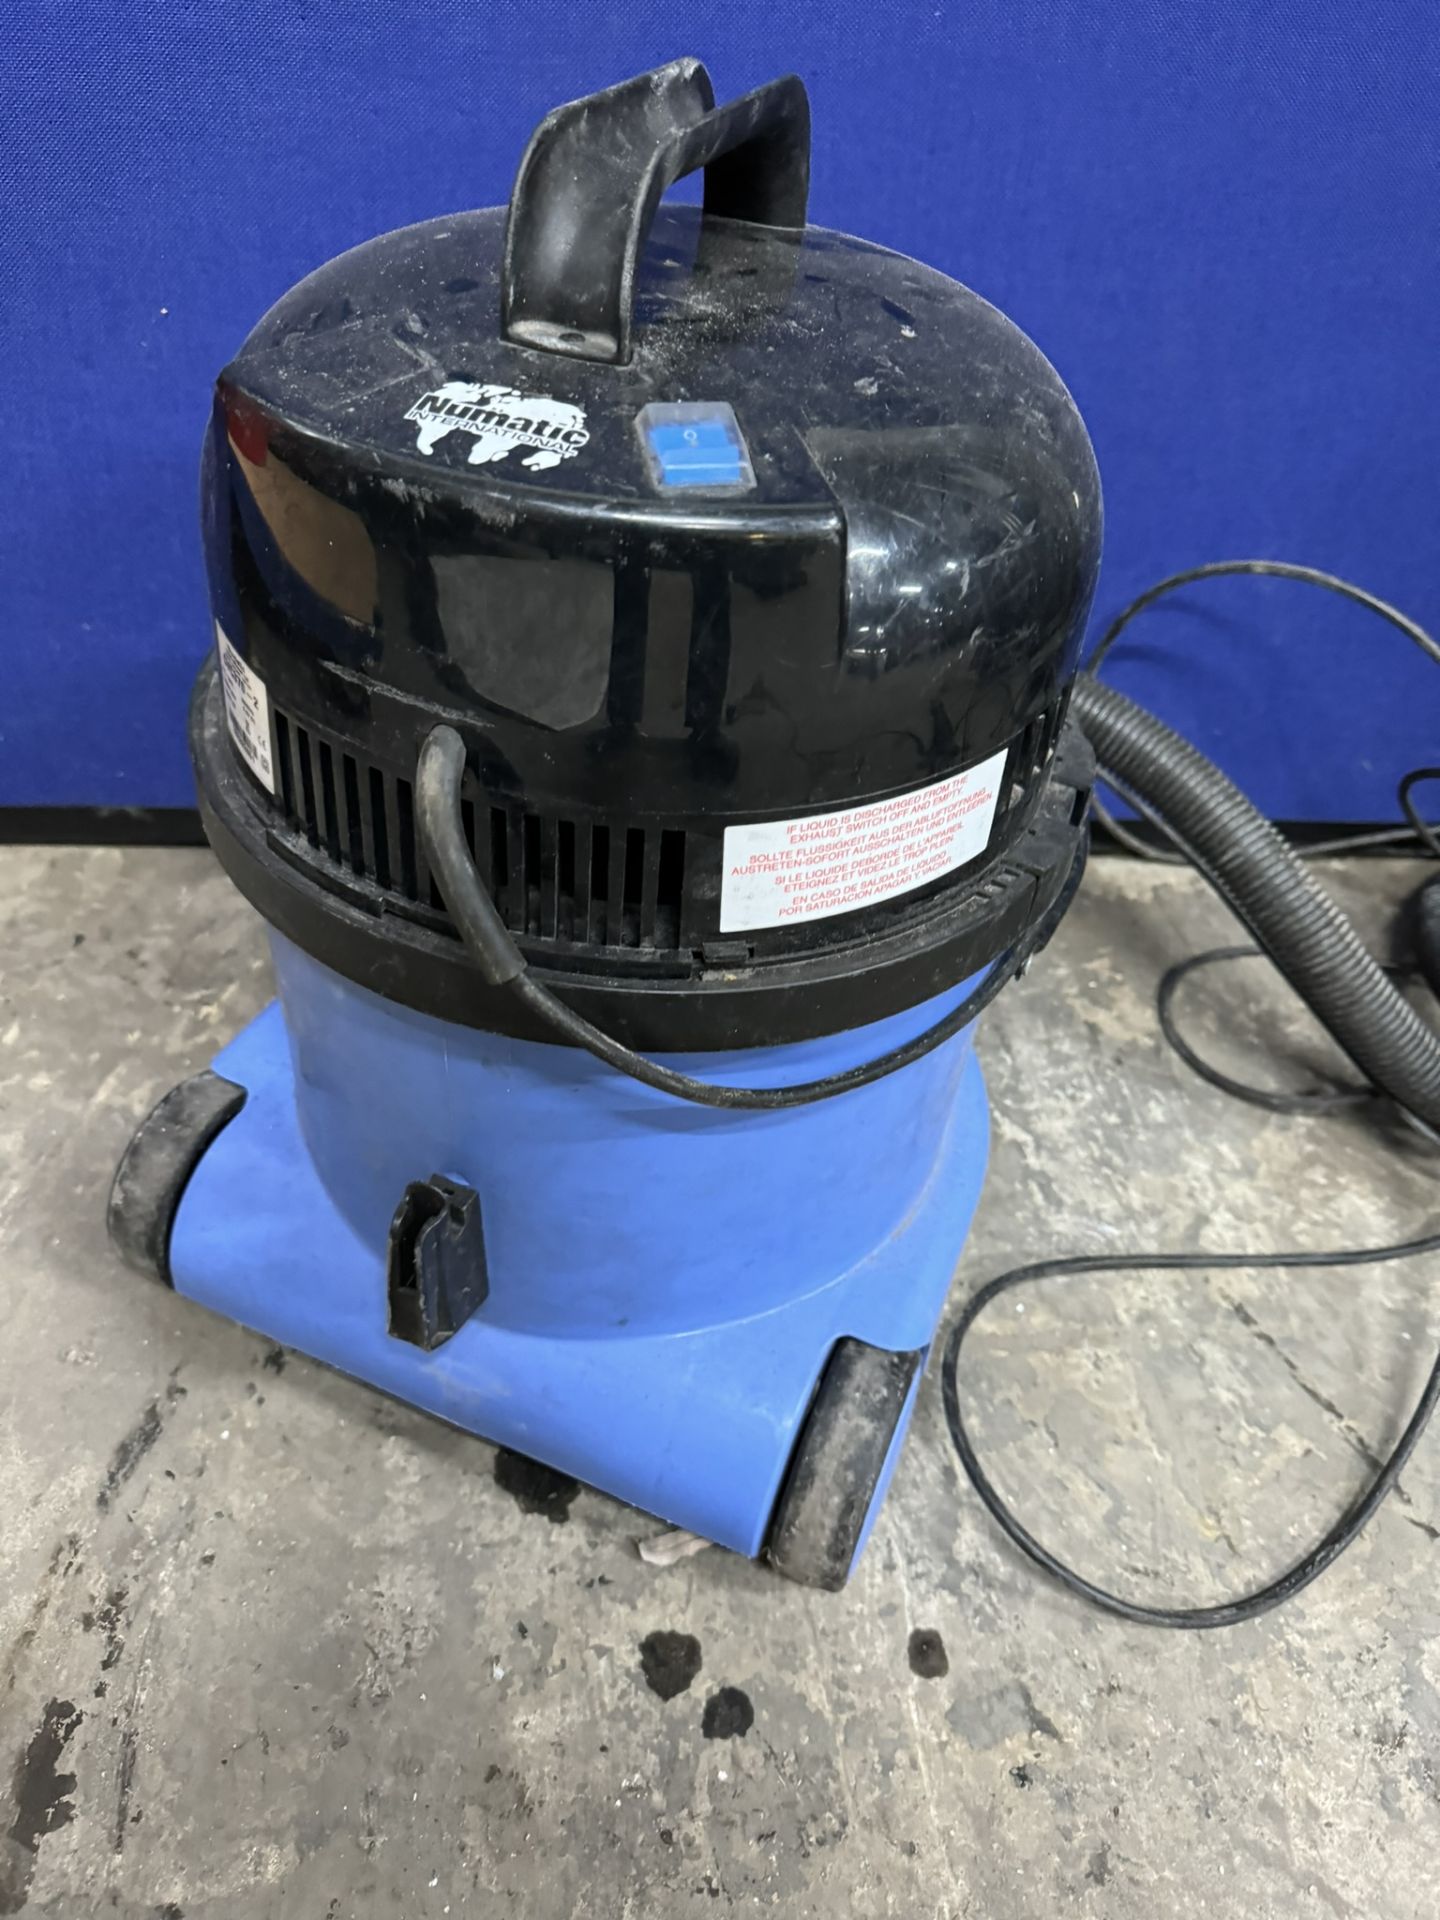 Numatic Charles CVC370-2 Wet And Dry Bag Cylinder Vacuum Cleaner - Image 3 of 4